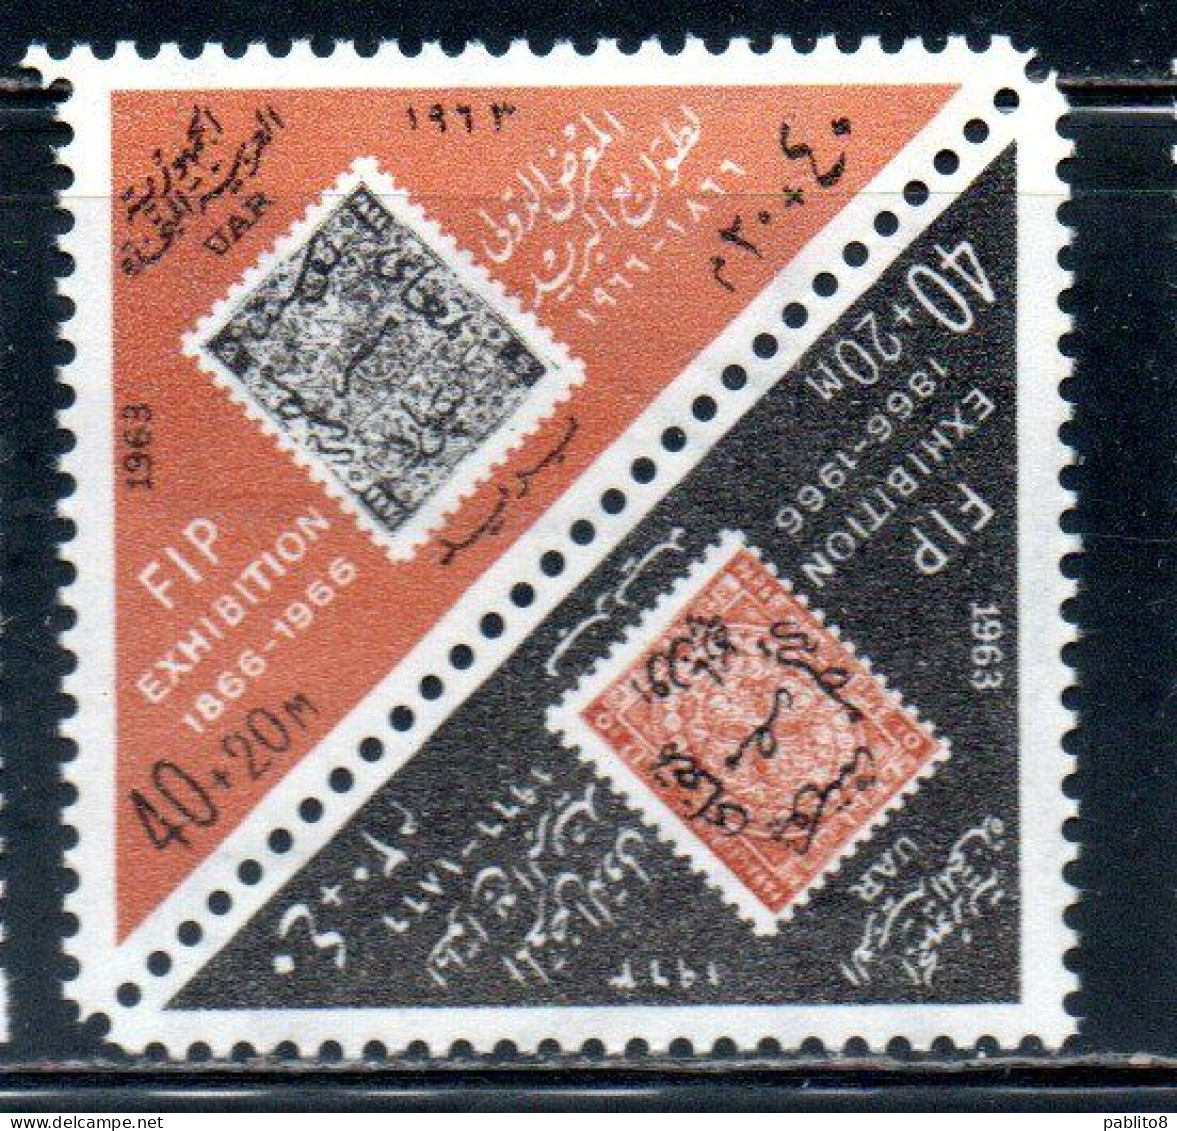 UAR EGYPT EGITTO 1963 POST DAY AND STAMP EXHIBITION 1966 OF THE FIP 40m + 20m MNH - Nuovi